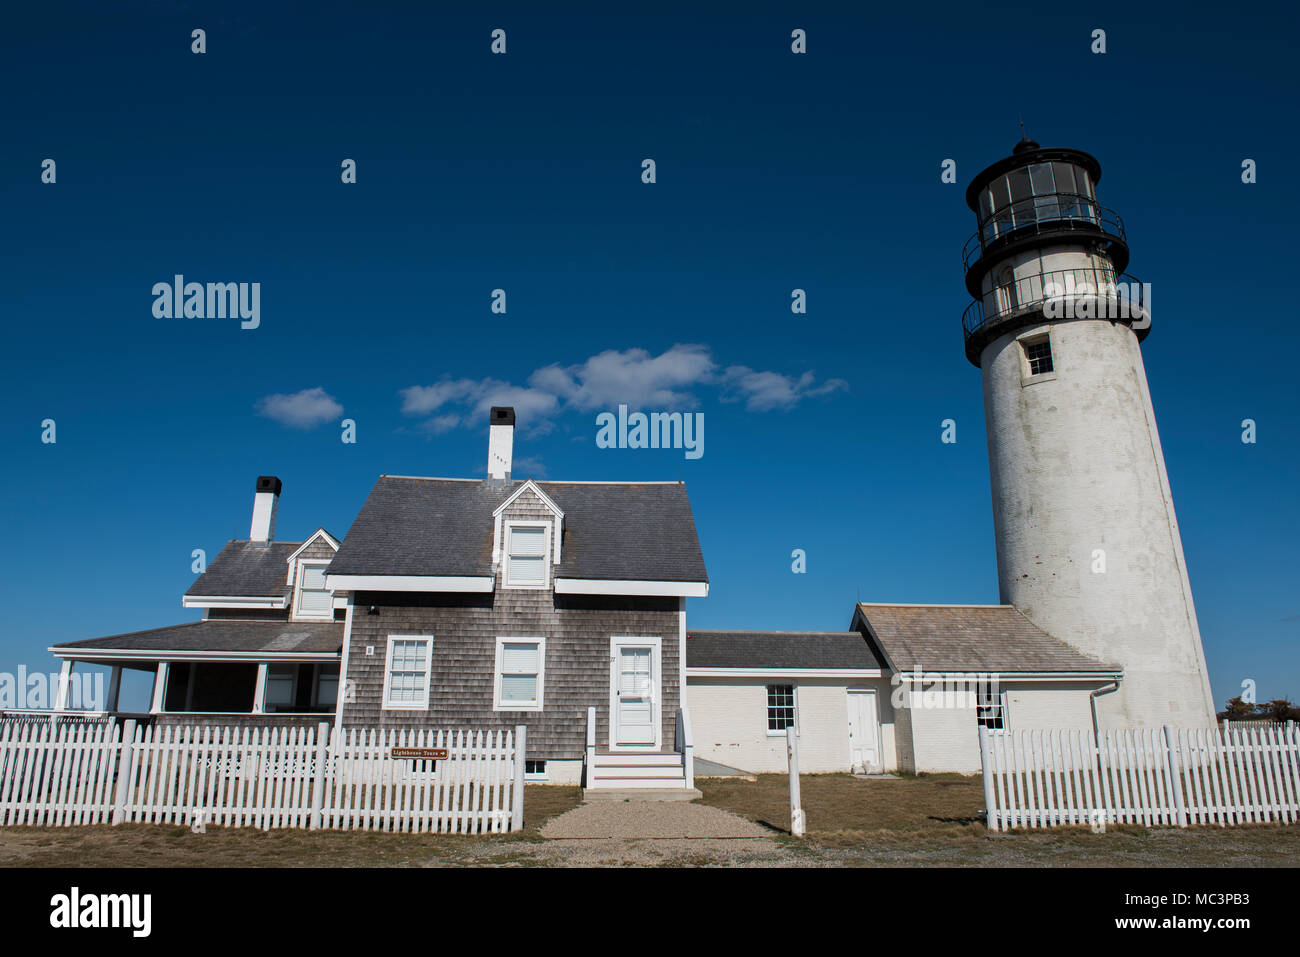 The Highland Light is an active lighthouse built in 1797 on the Cape Cod National Seashore in North Truro, Massachusetts. Stock Photo